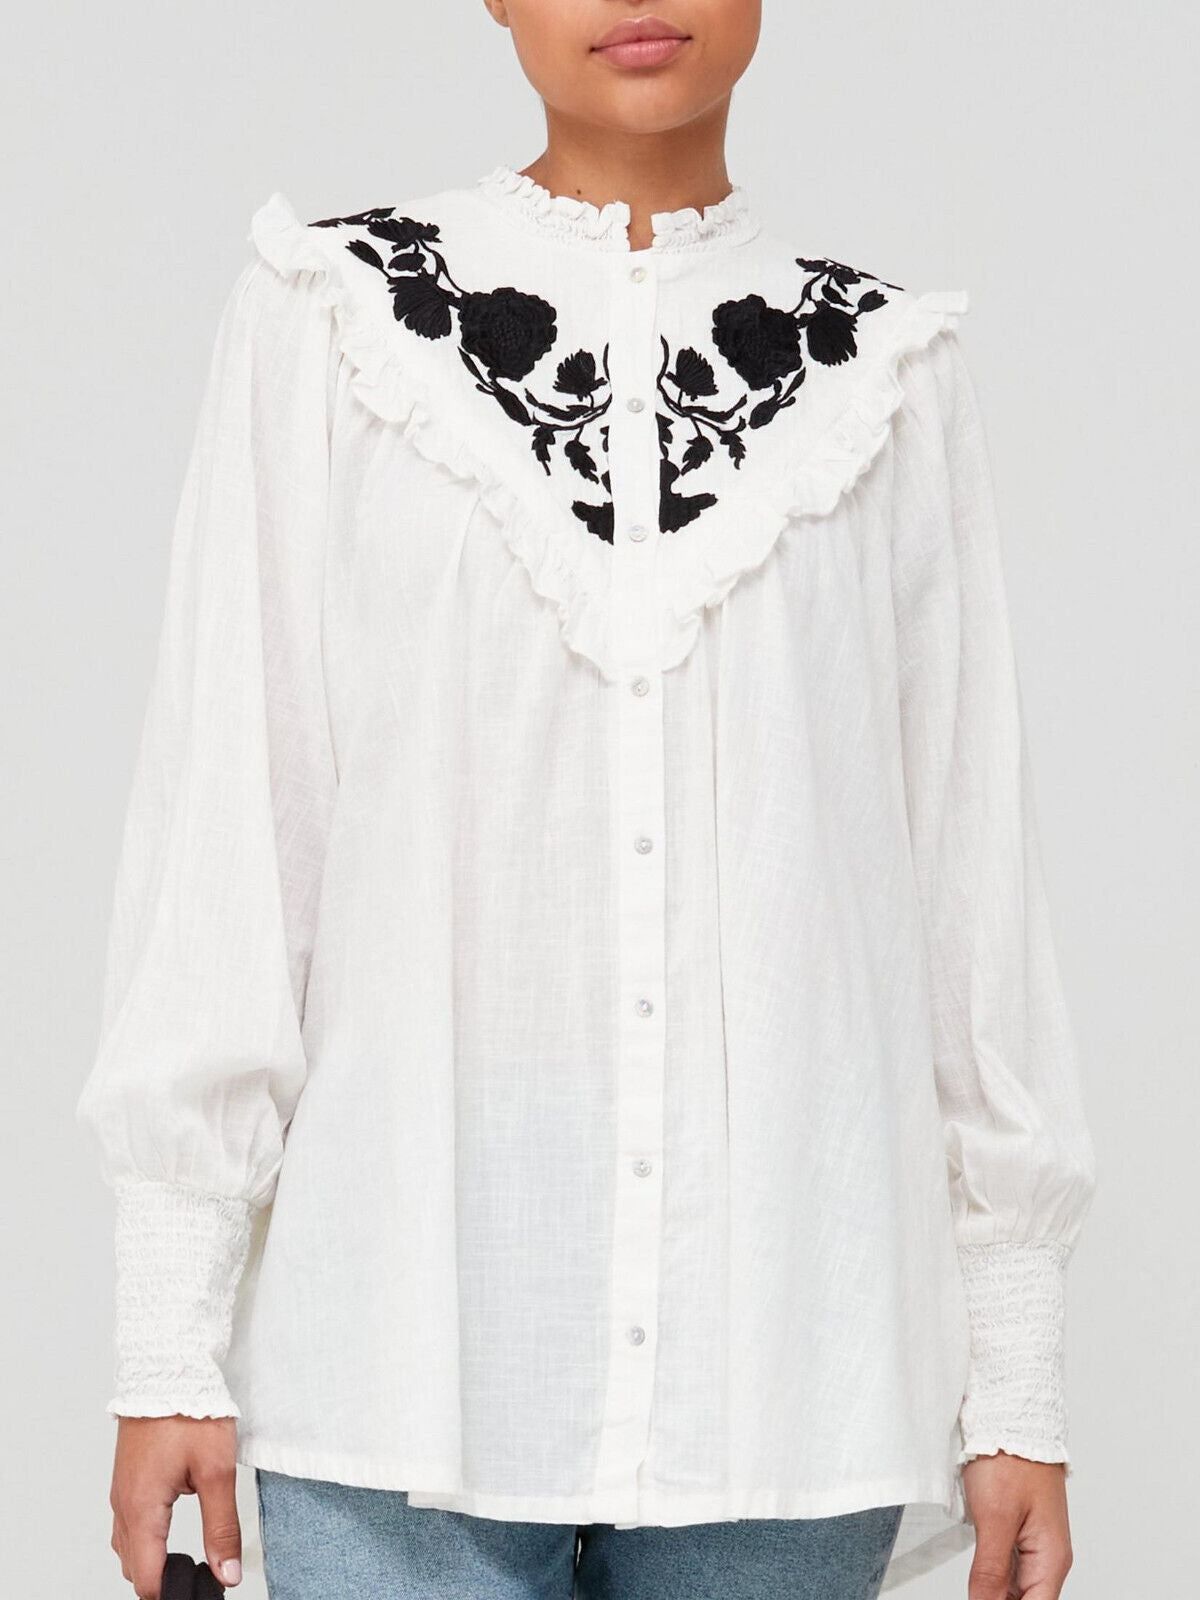 Free People Rose Vines White Embroidered Top Size Small **** V386